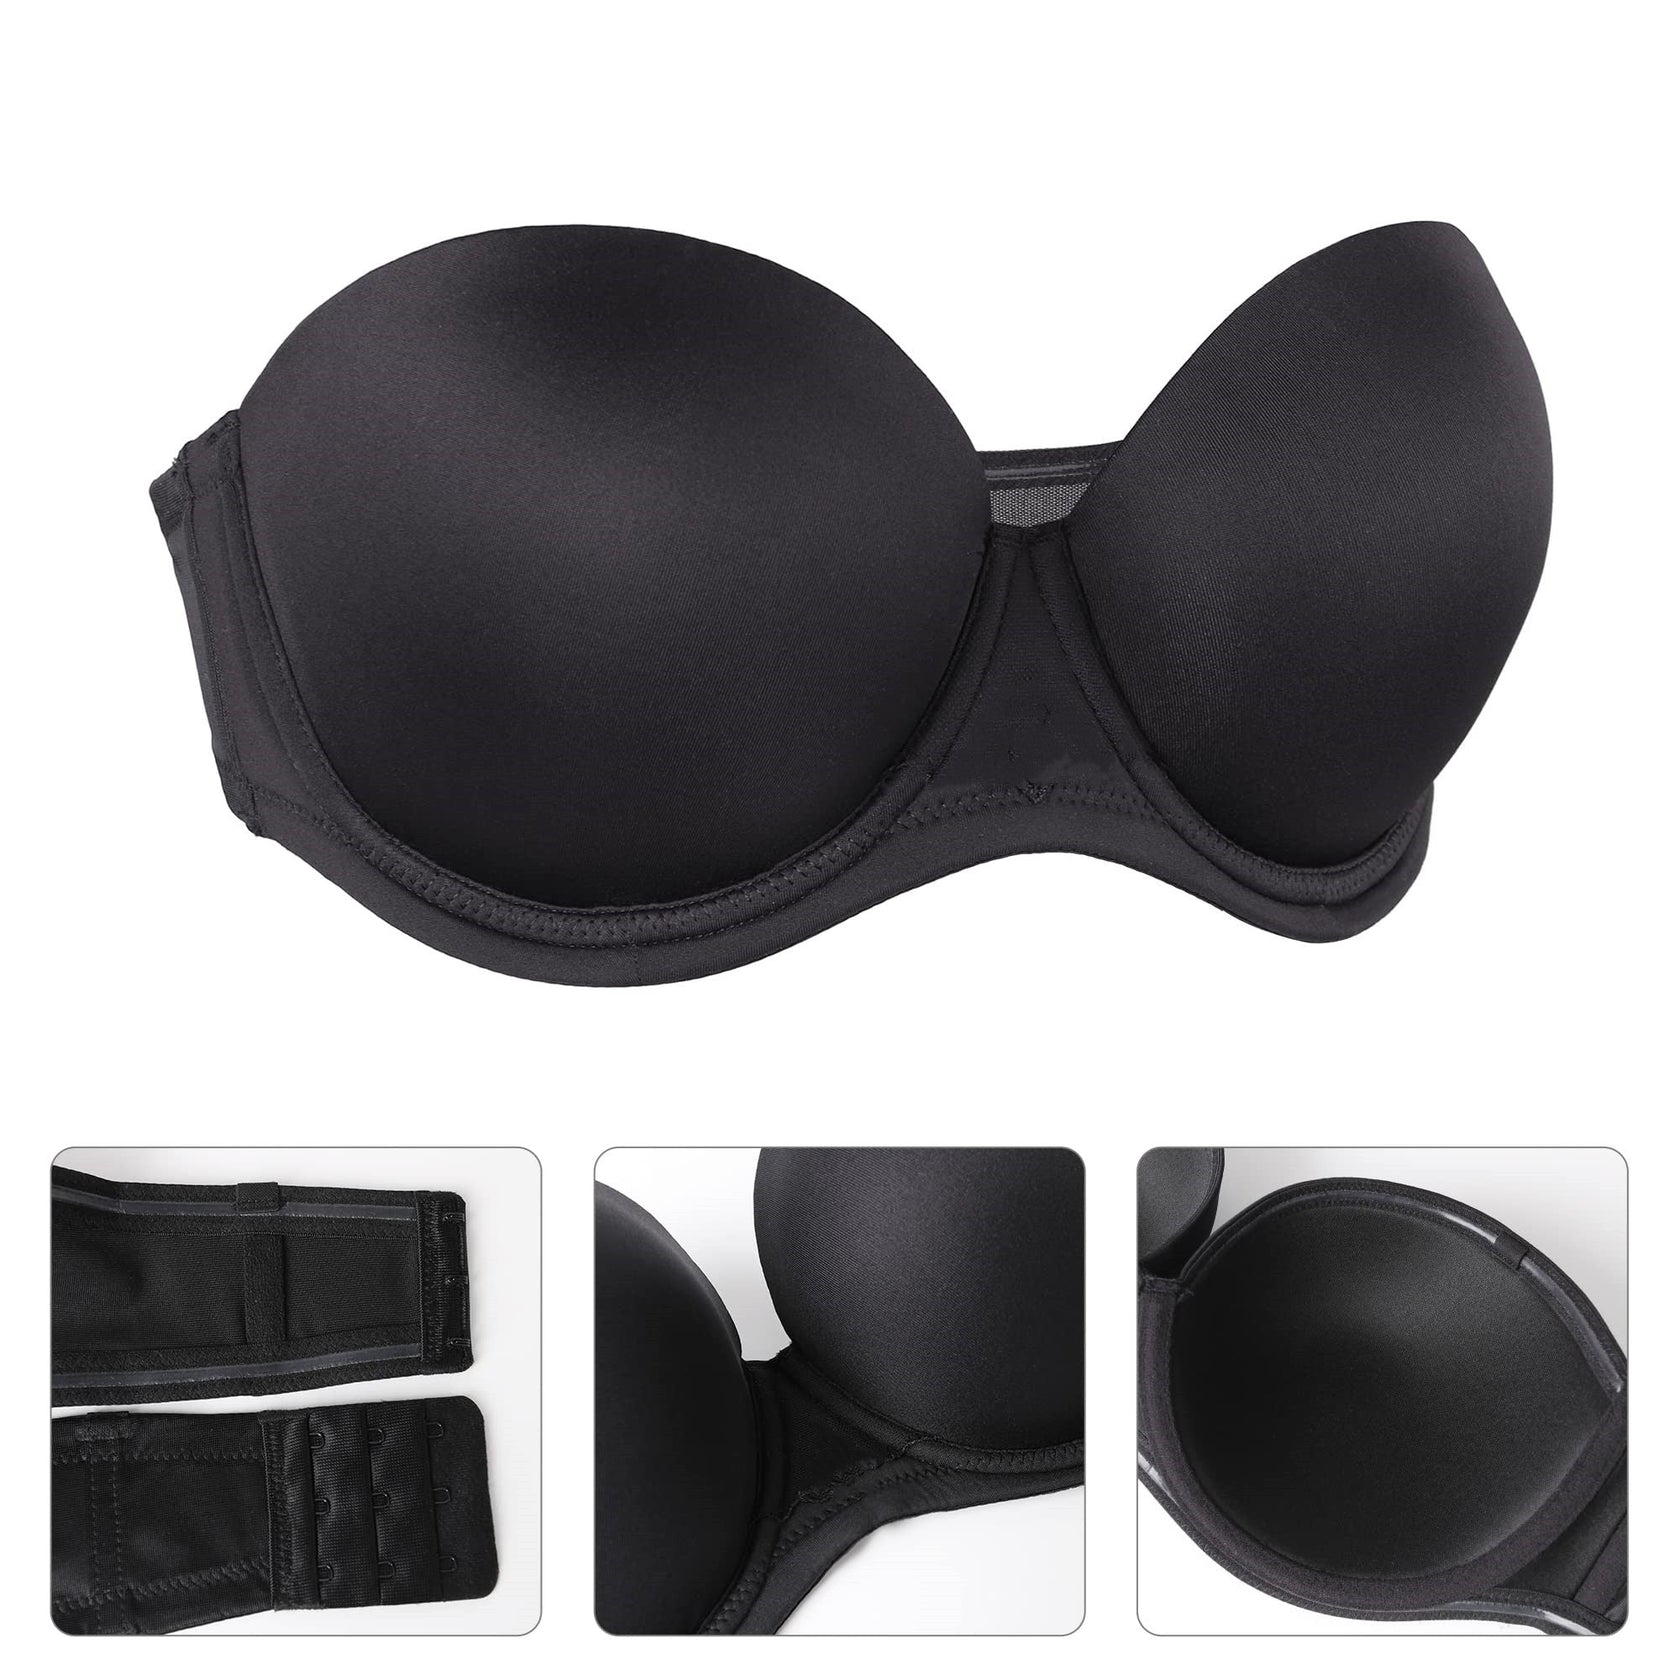 Push up strapless bra • Compare & see prices now »